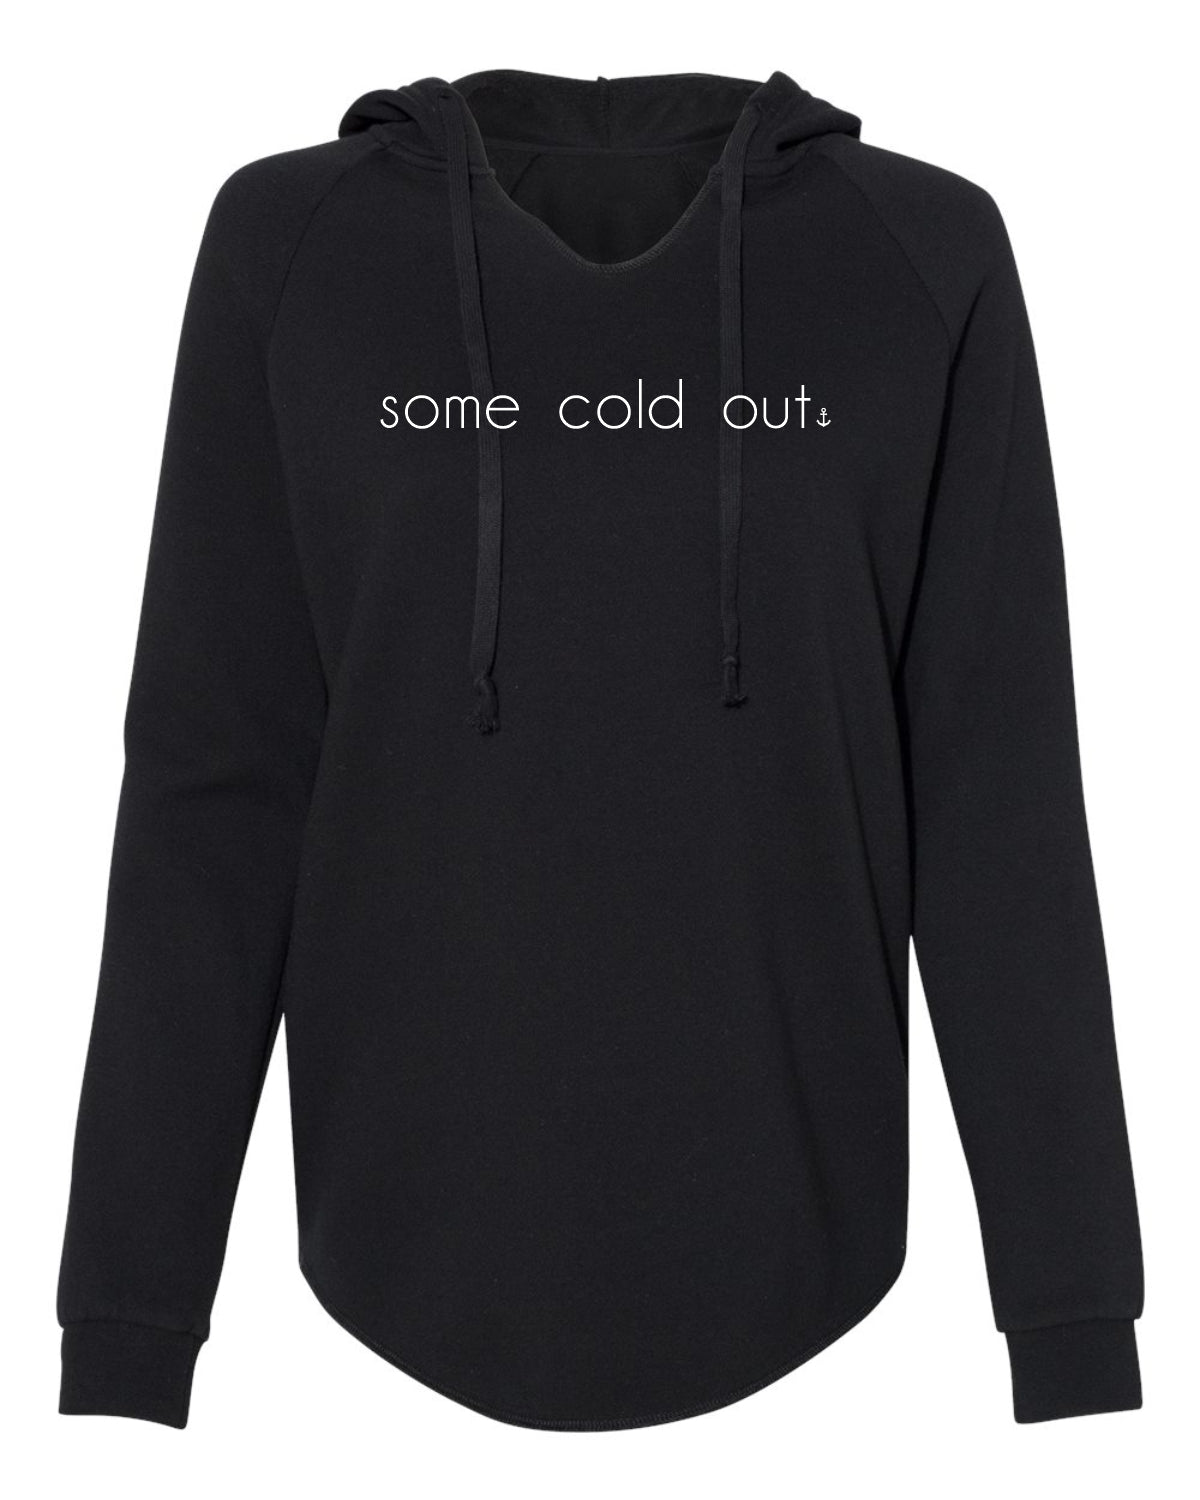 "Some Cold Out" Ladies Hoodie